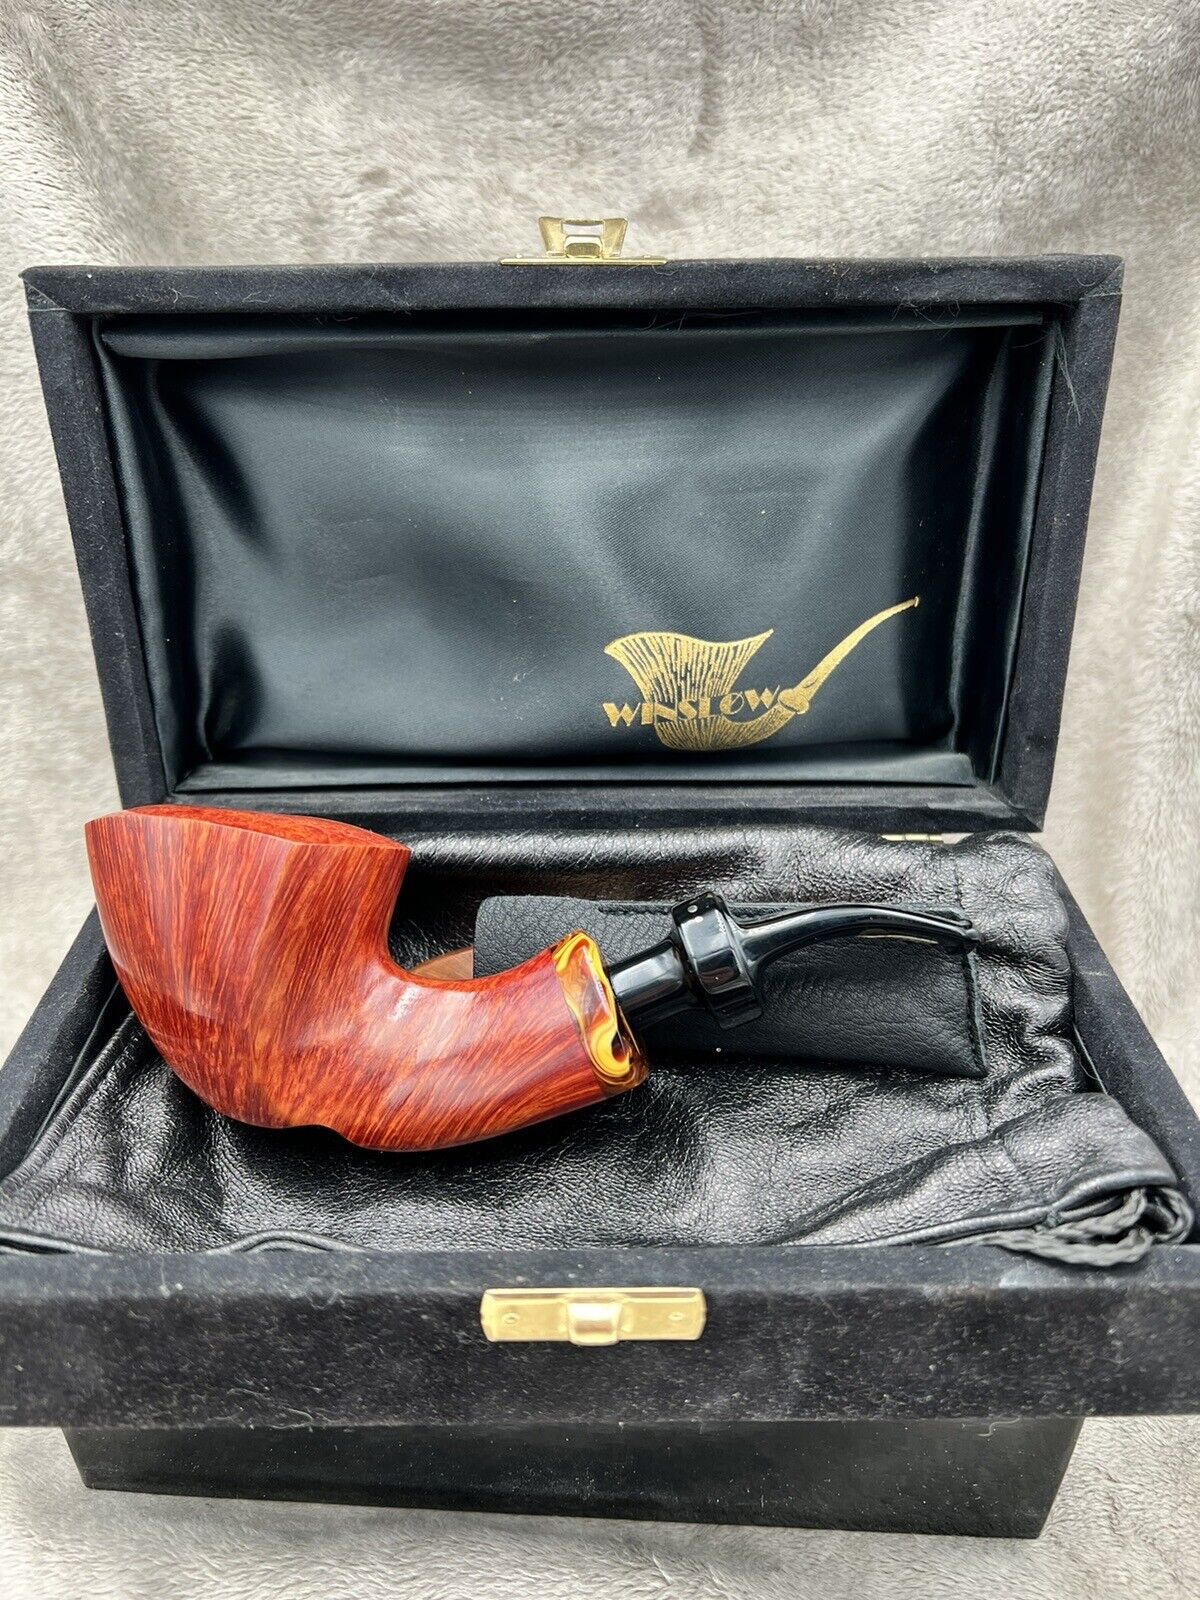 Poul Winslow PRIVATE COLLECTION. New Old Stock. Unsmoked And Stunning